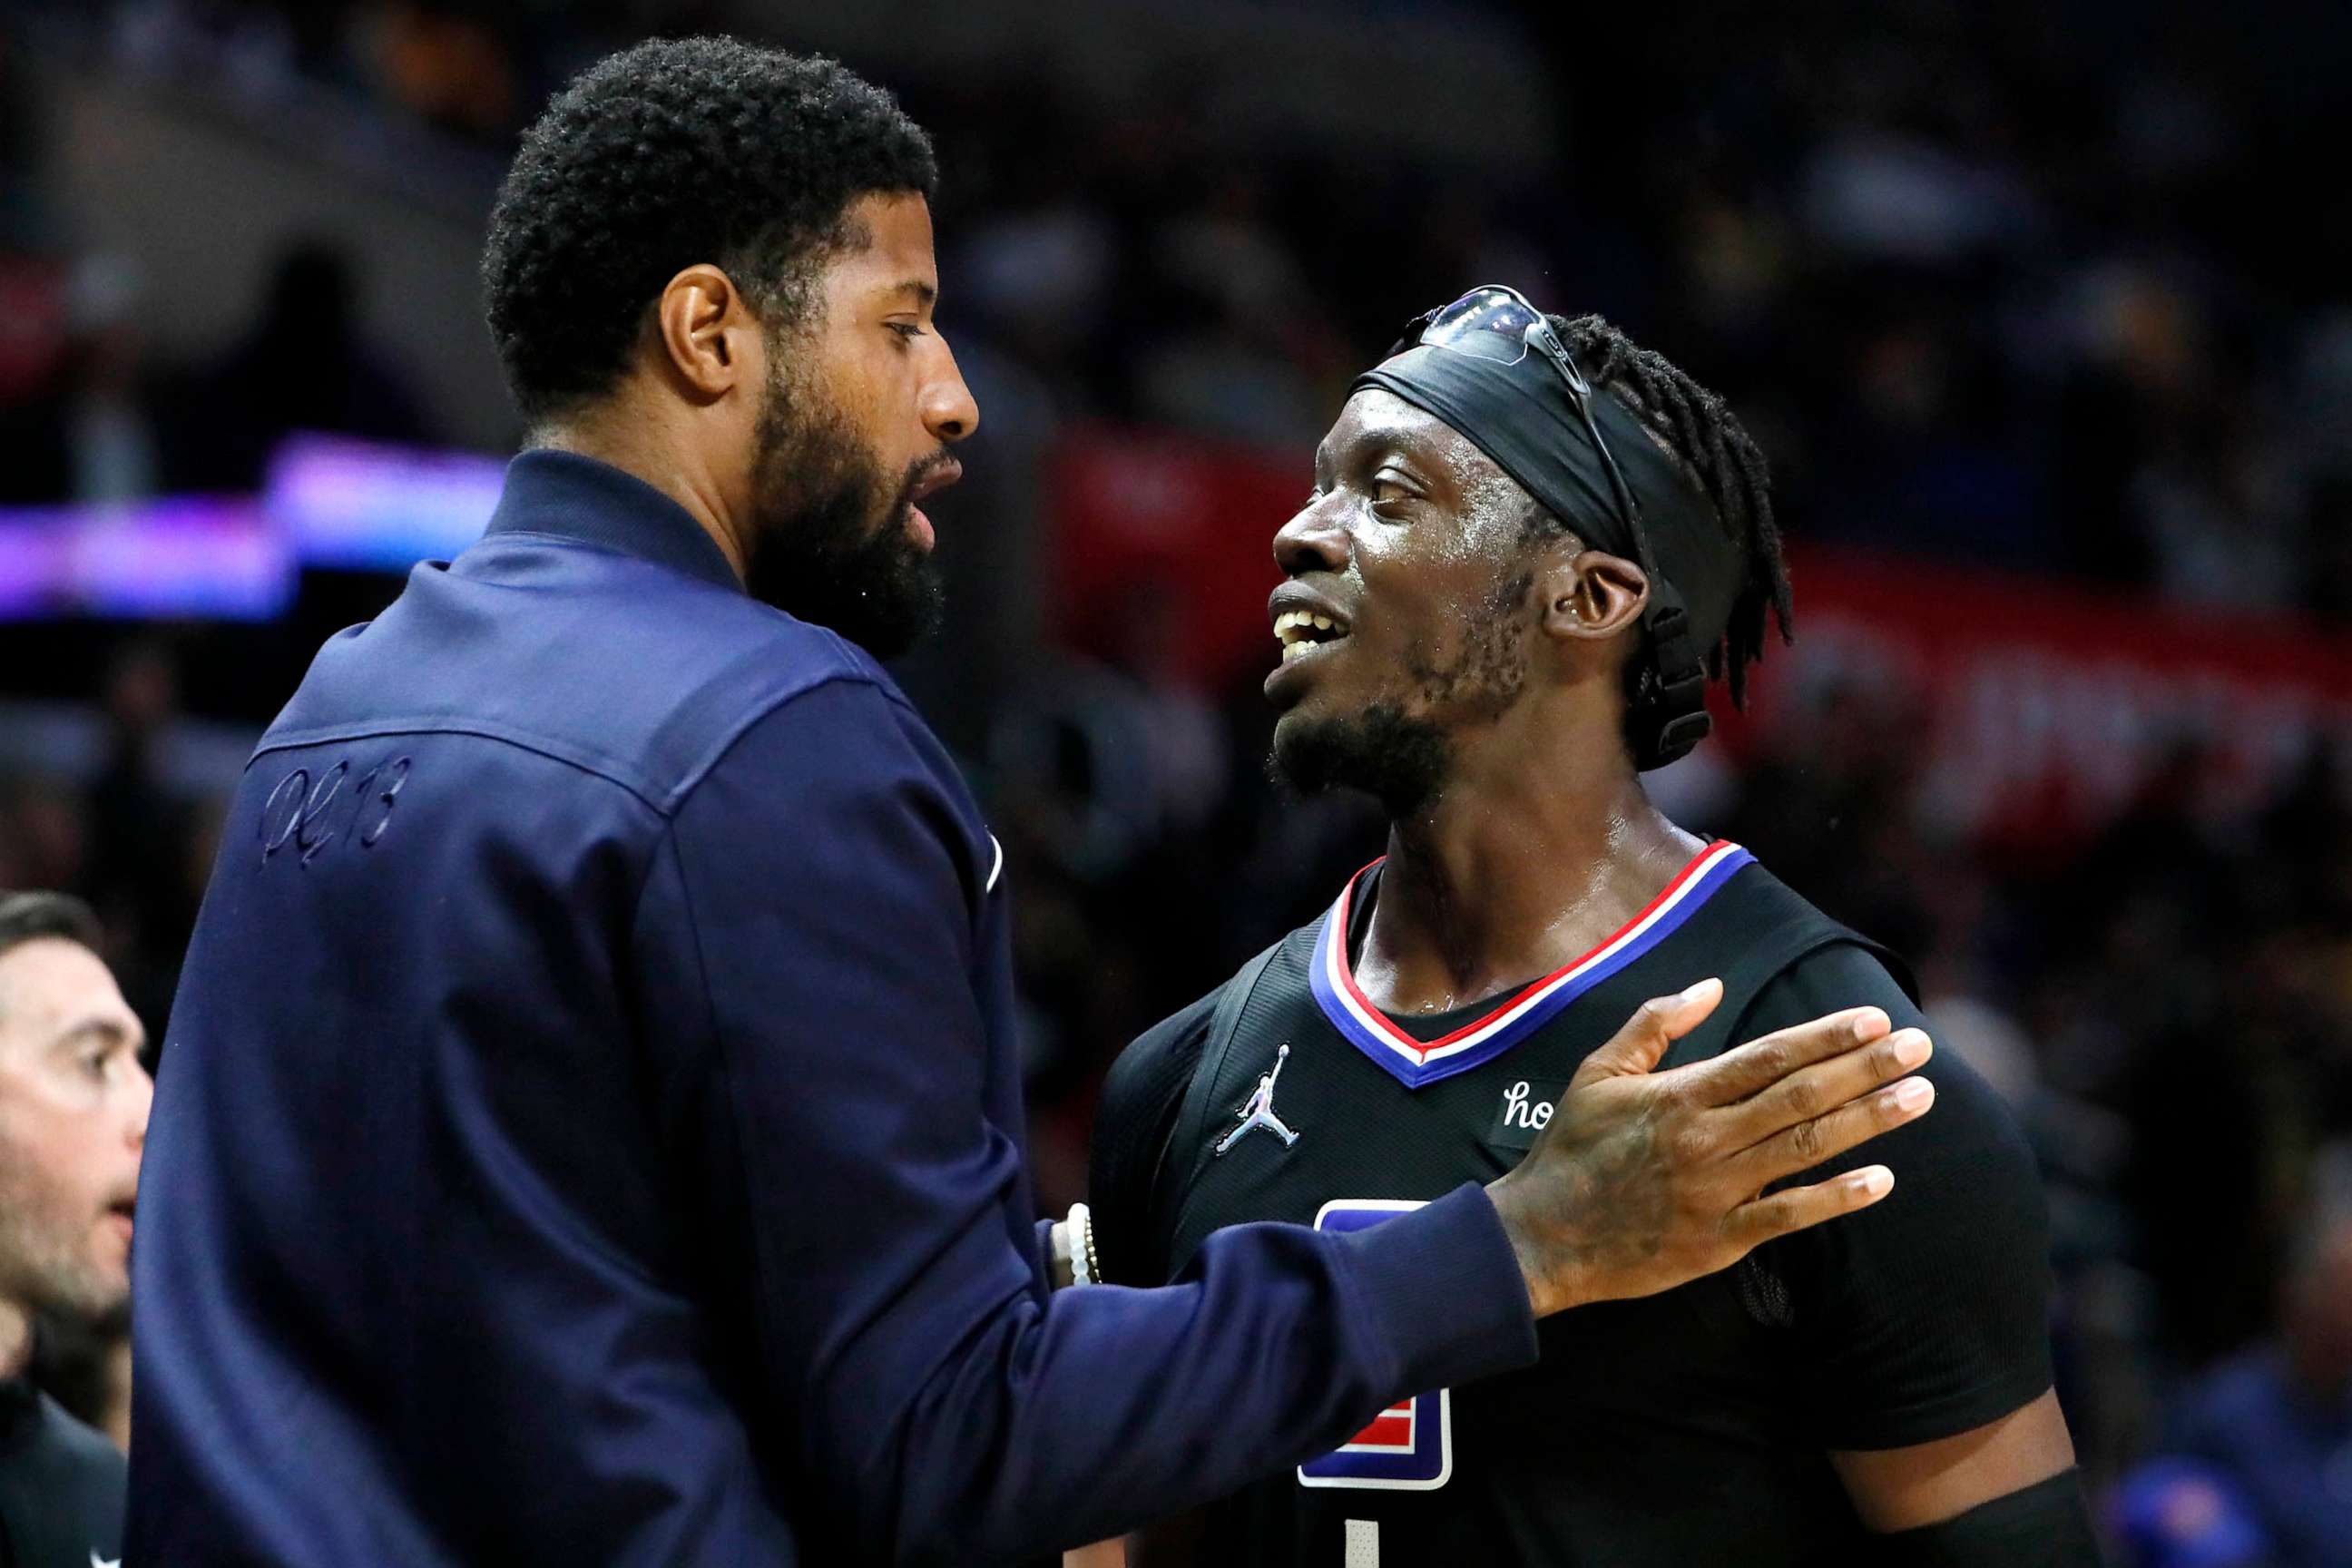 Paul George understands what the LA Clippers' assignment is this